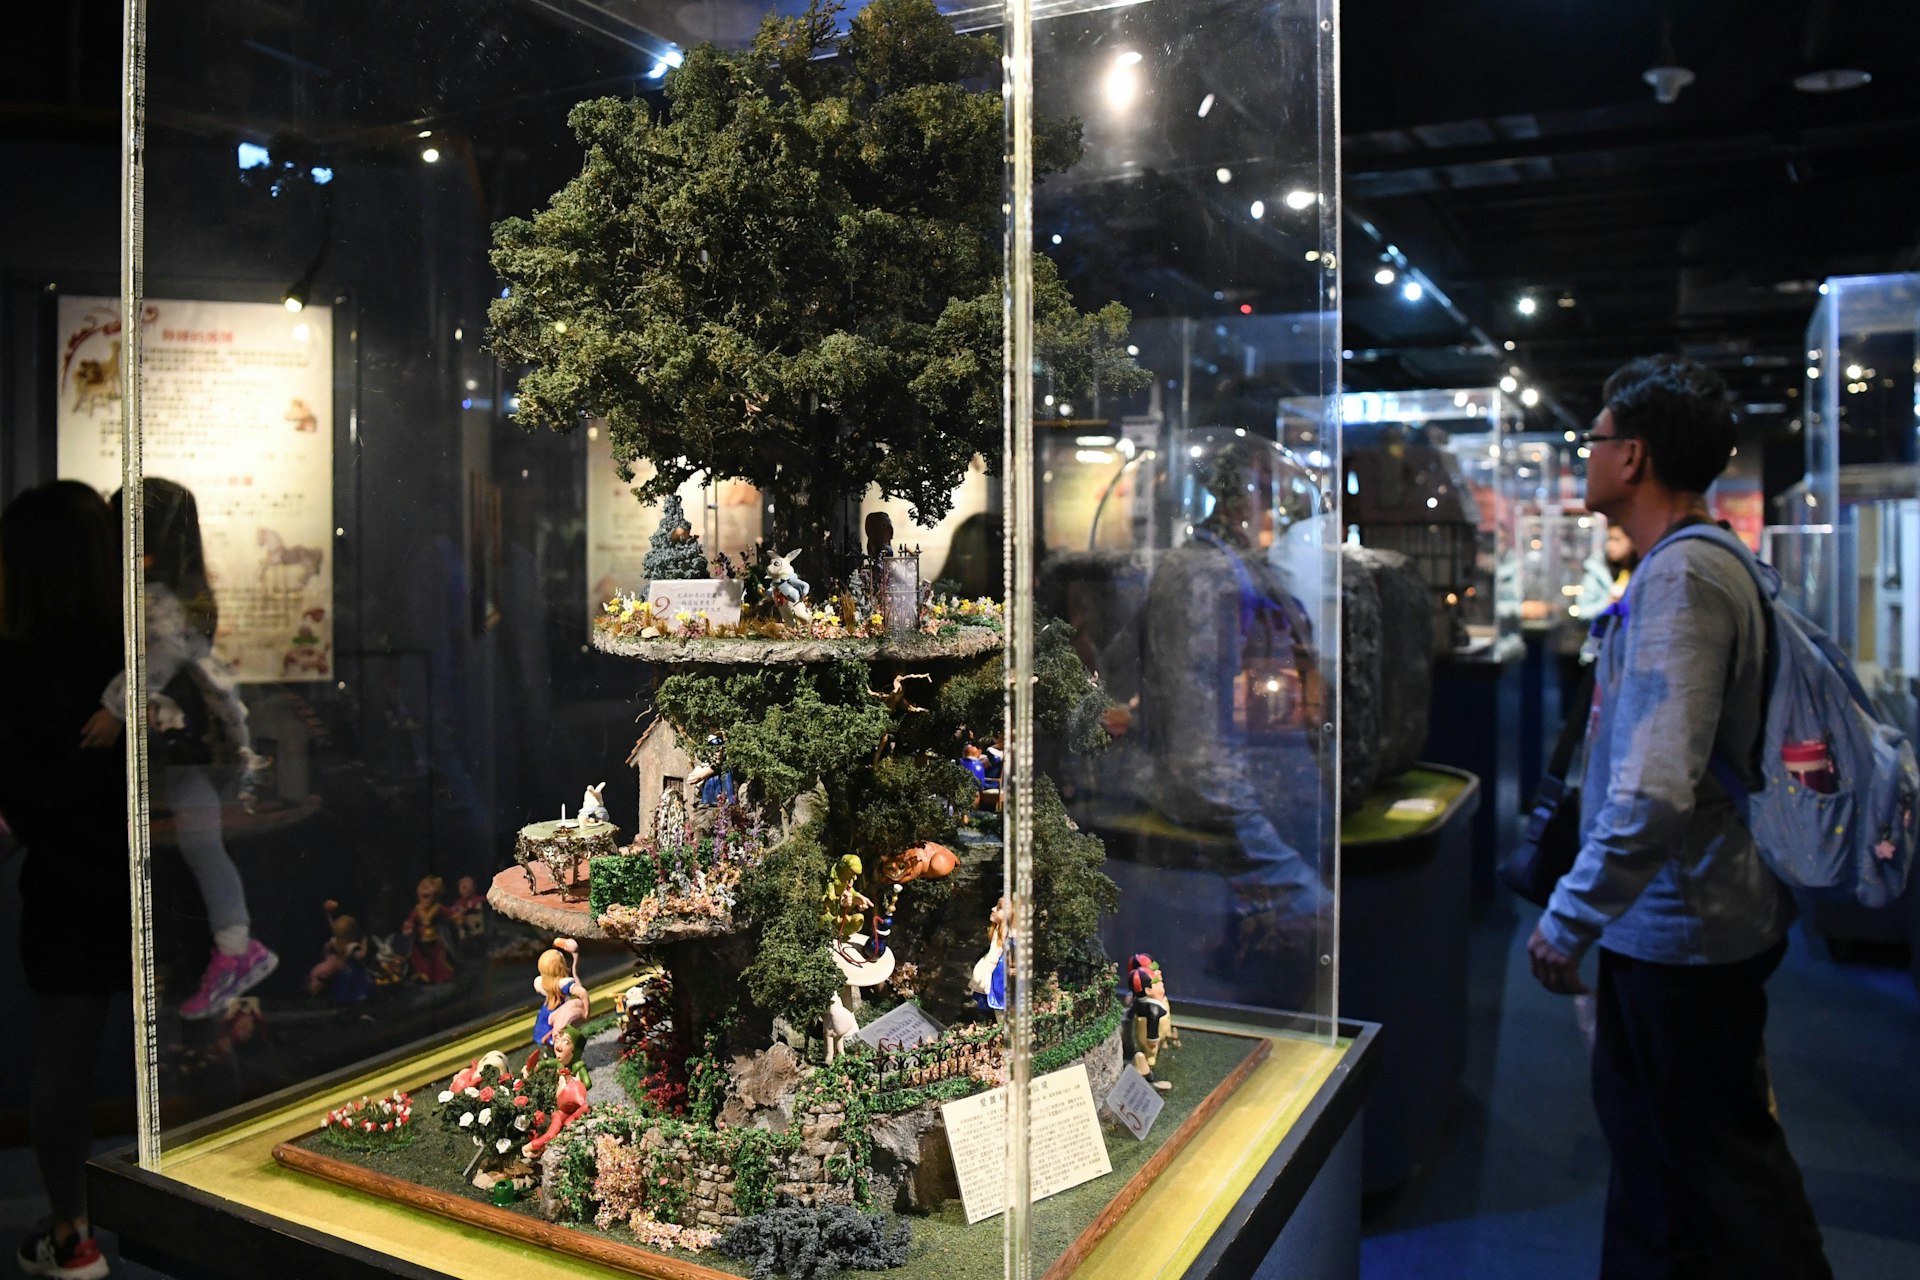 Visitors view the miniatures displayed at Miniatures Museum in Taipei, Taiwan